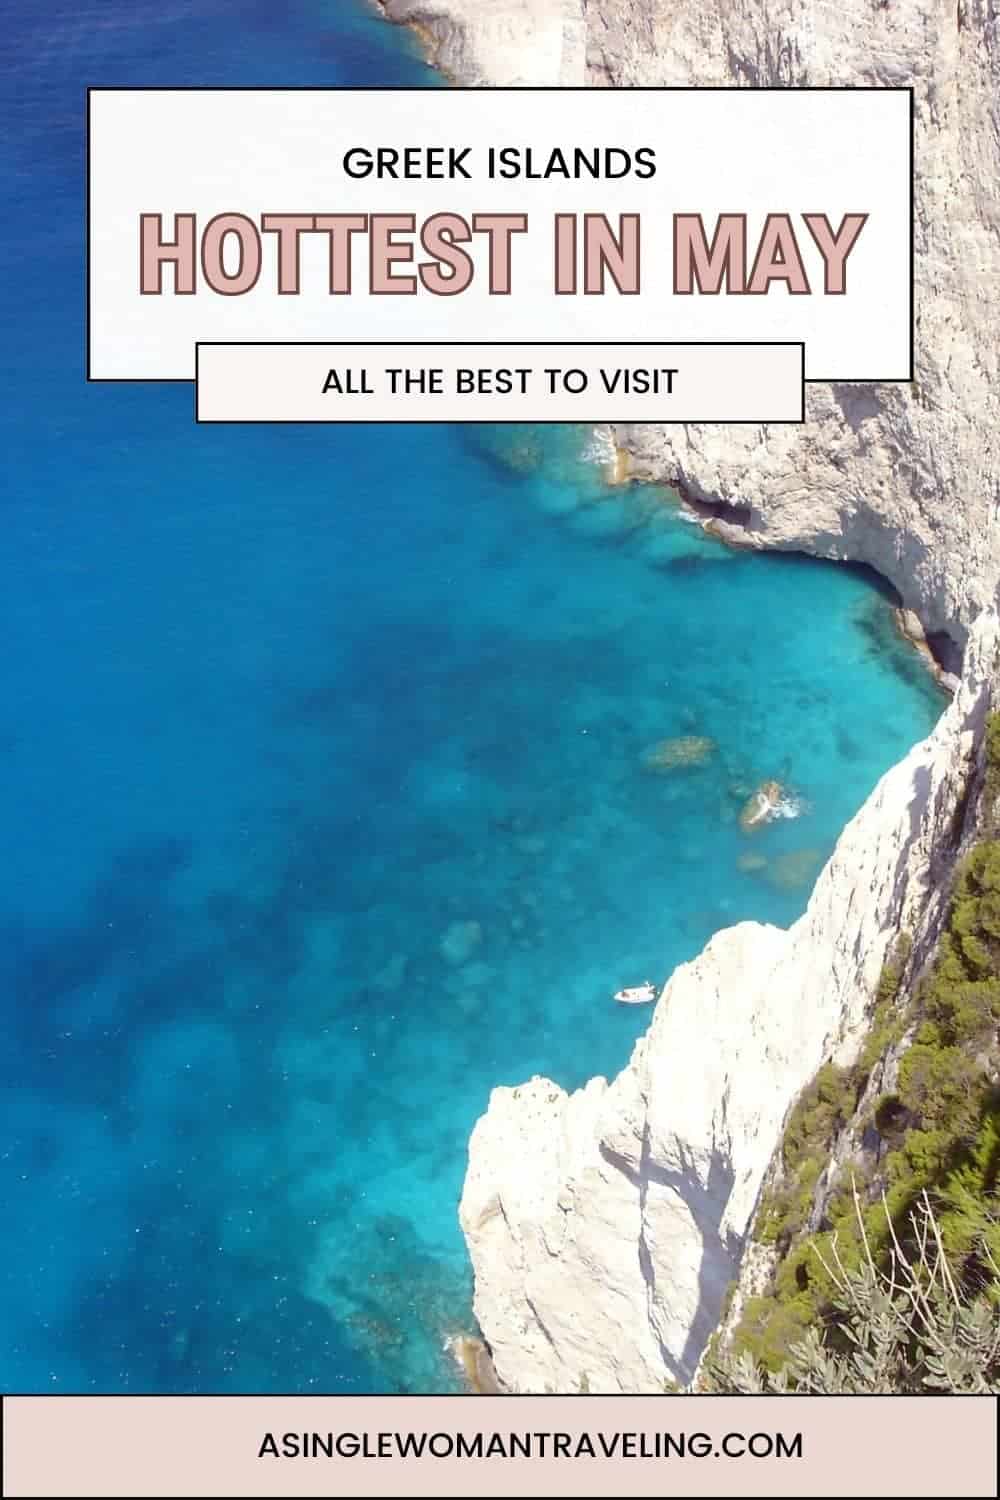 Breathtaking cliffside view of the turquoise sea surrounding a Greek island, inviting travelers to experience the warmth of May.